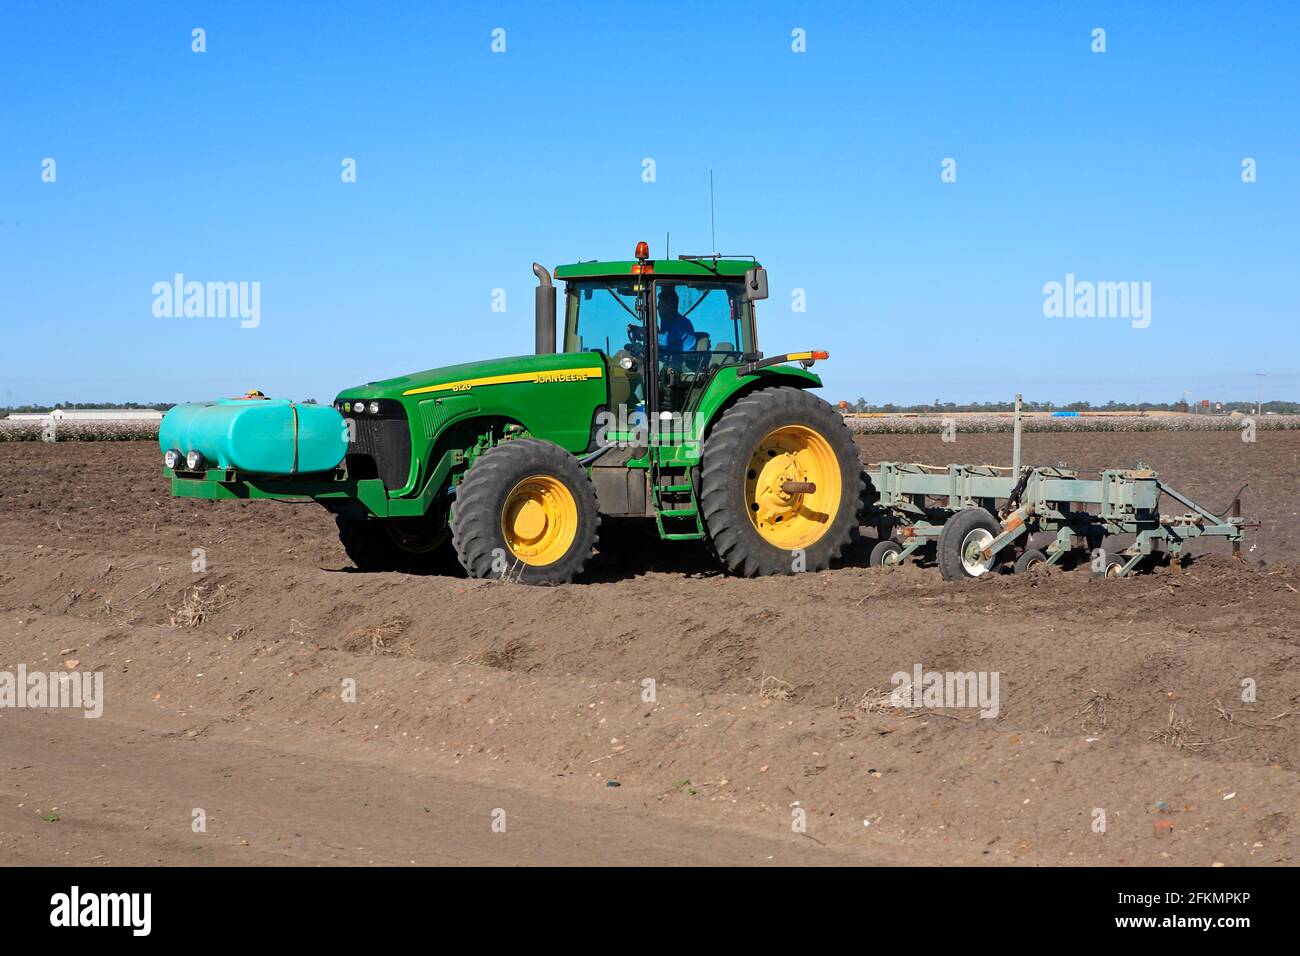 John Deere 8120 tractor plowing a cotton field near Narrabri, NSW, Australia. There is a liquid fertiliser tank on the front of the tractor. Stock Photo